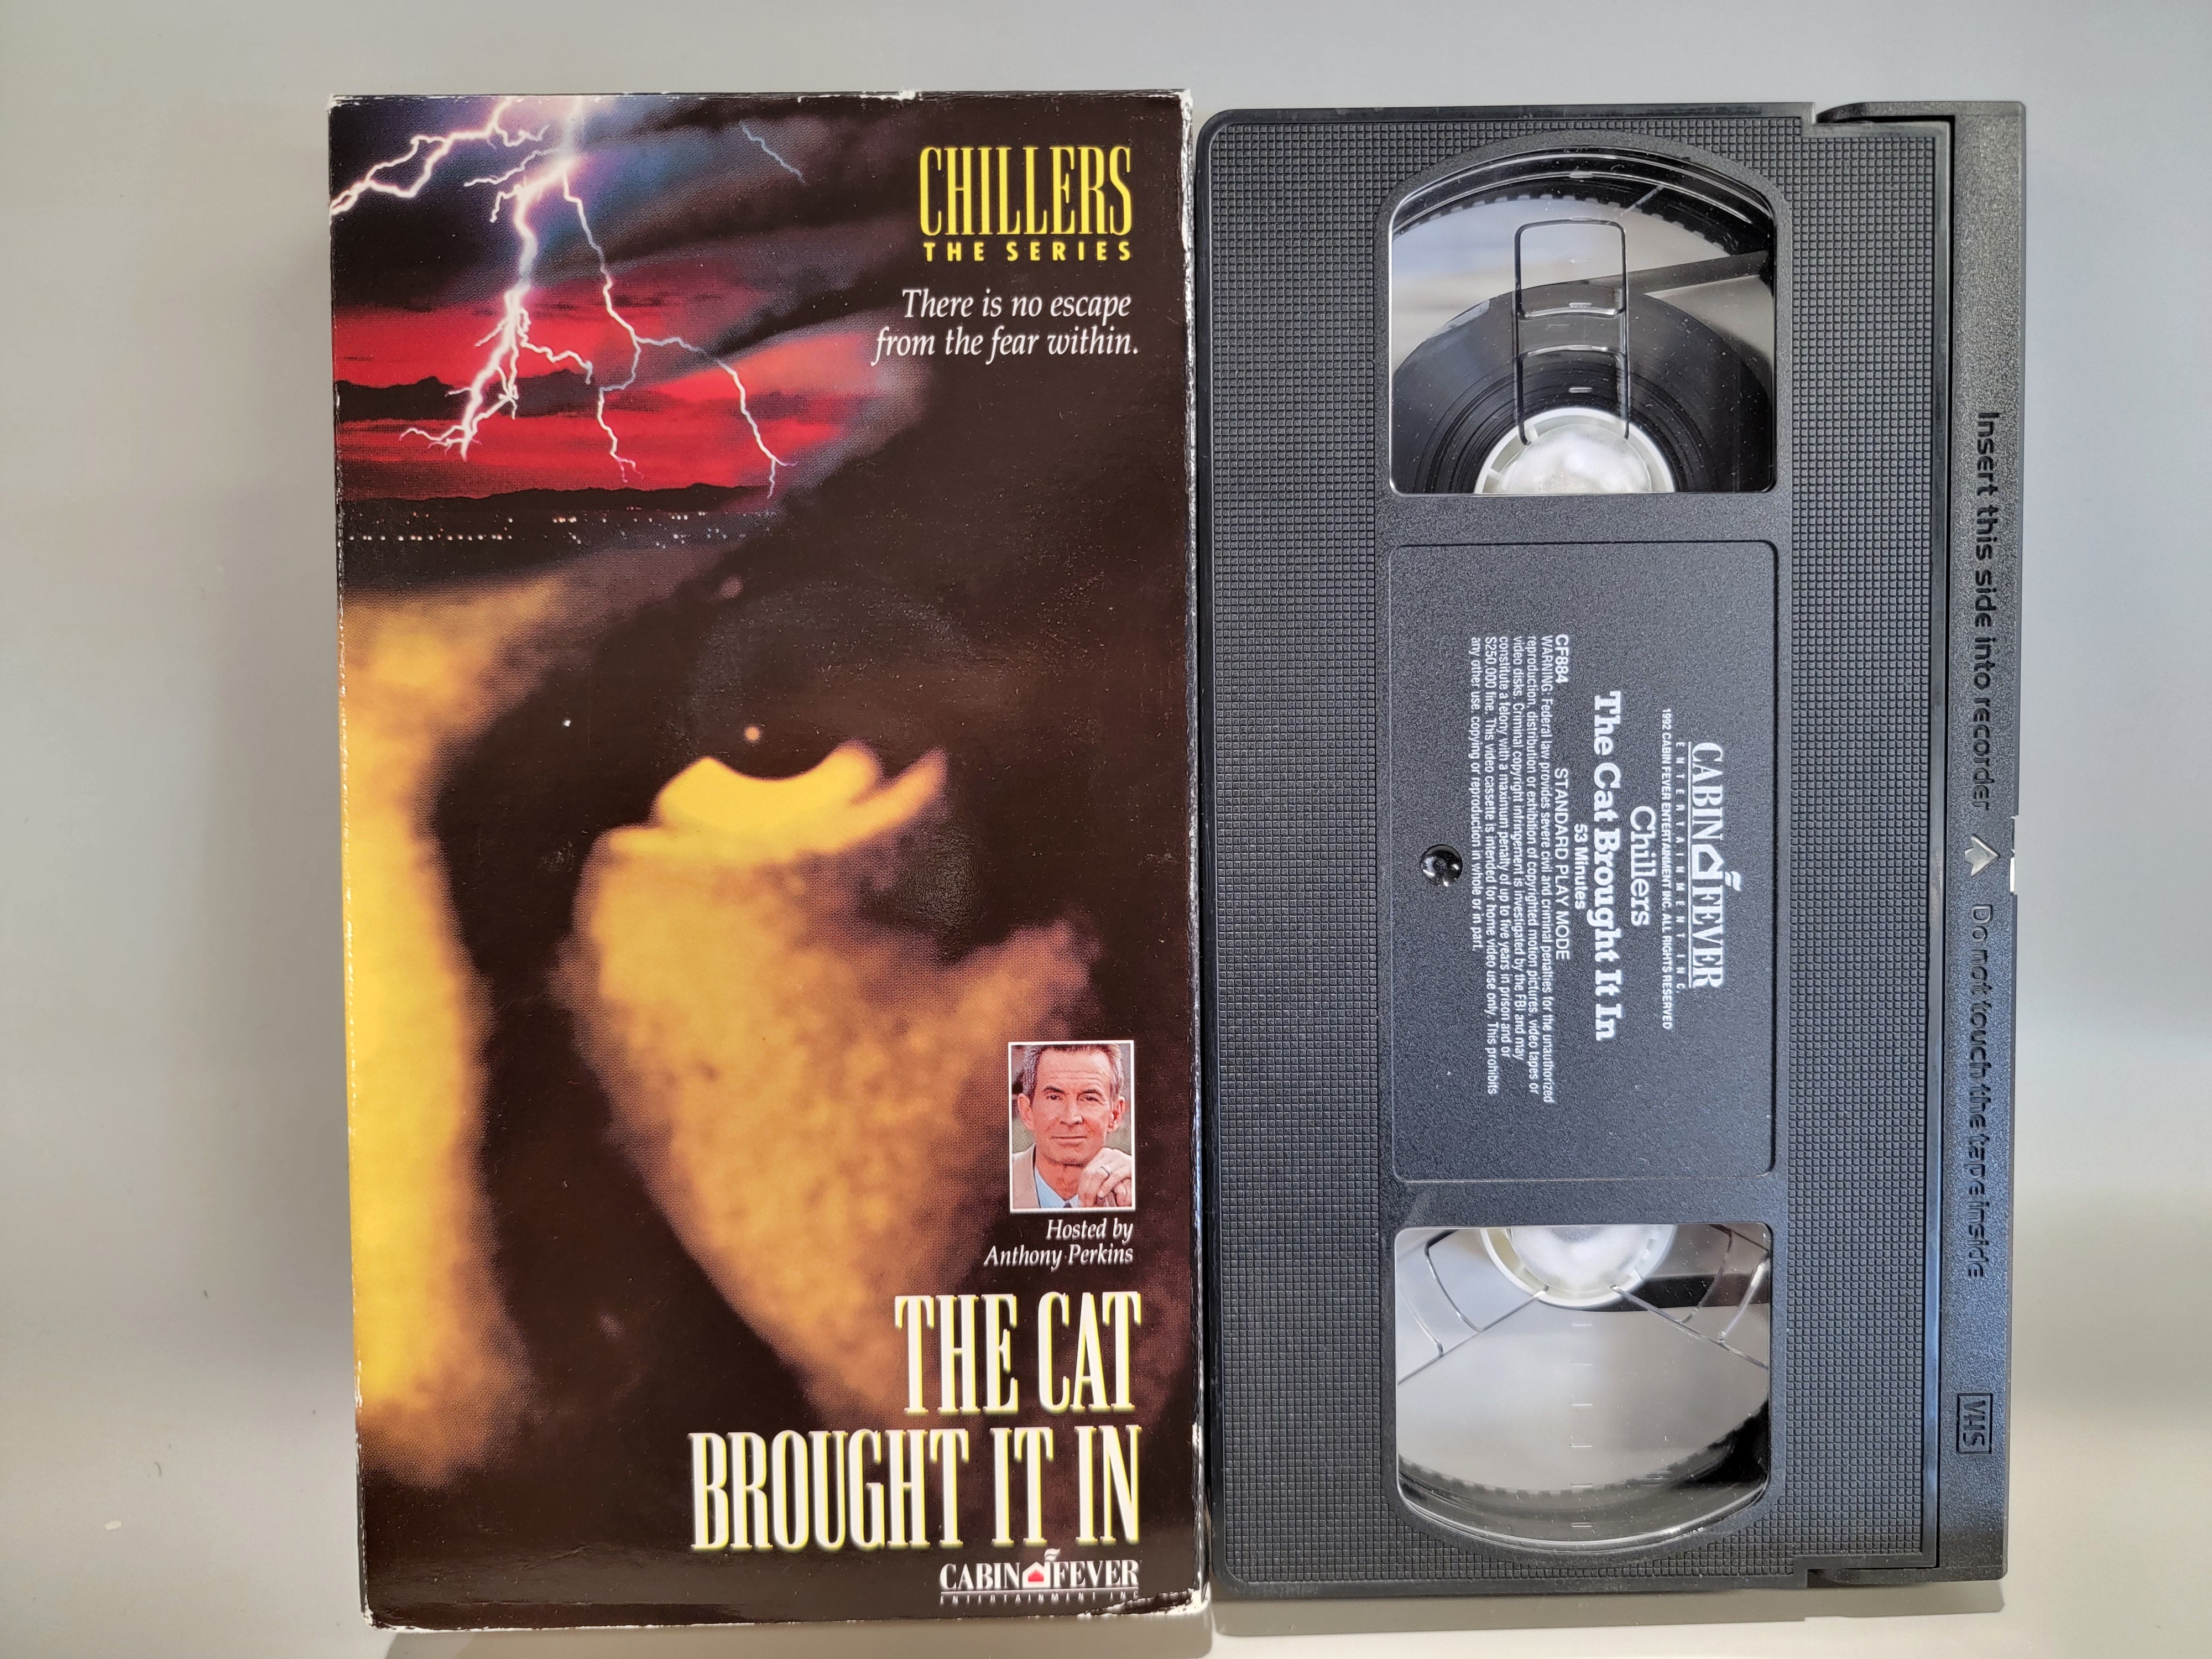 CHILLERS THE SERIES: THE CAT BROUGHT IT IN VHS [USED]